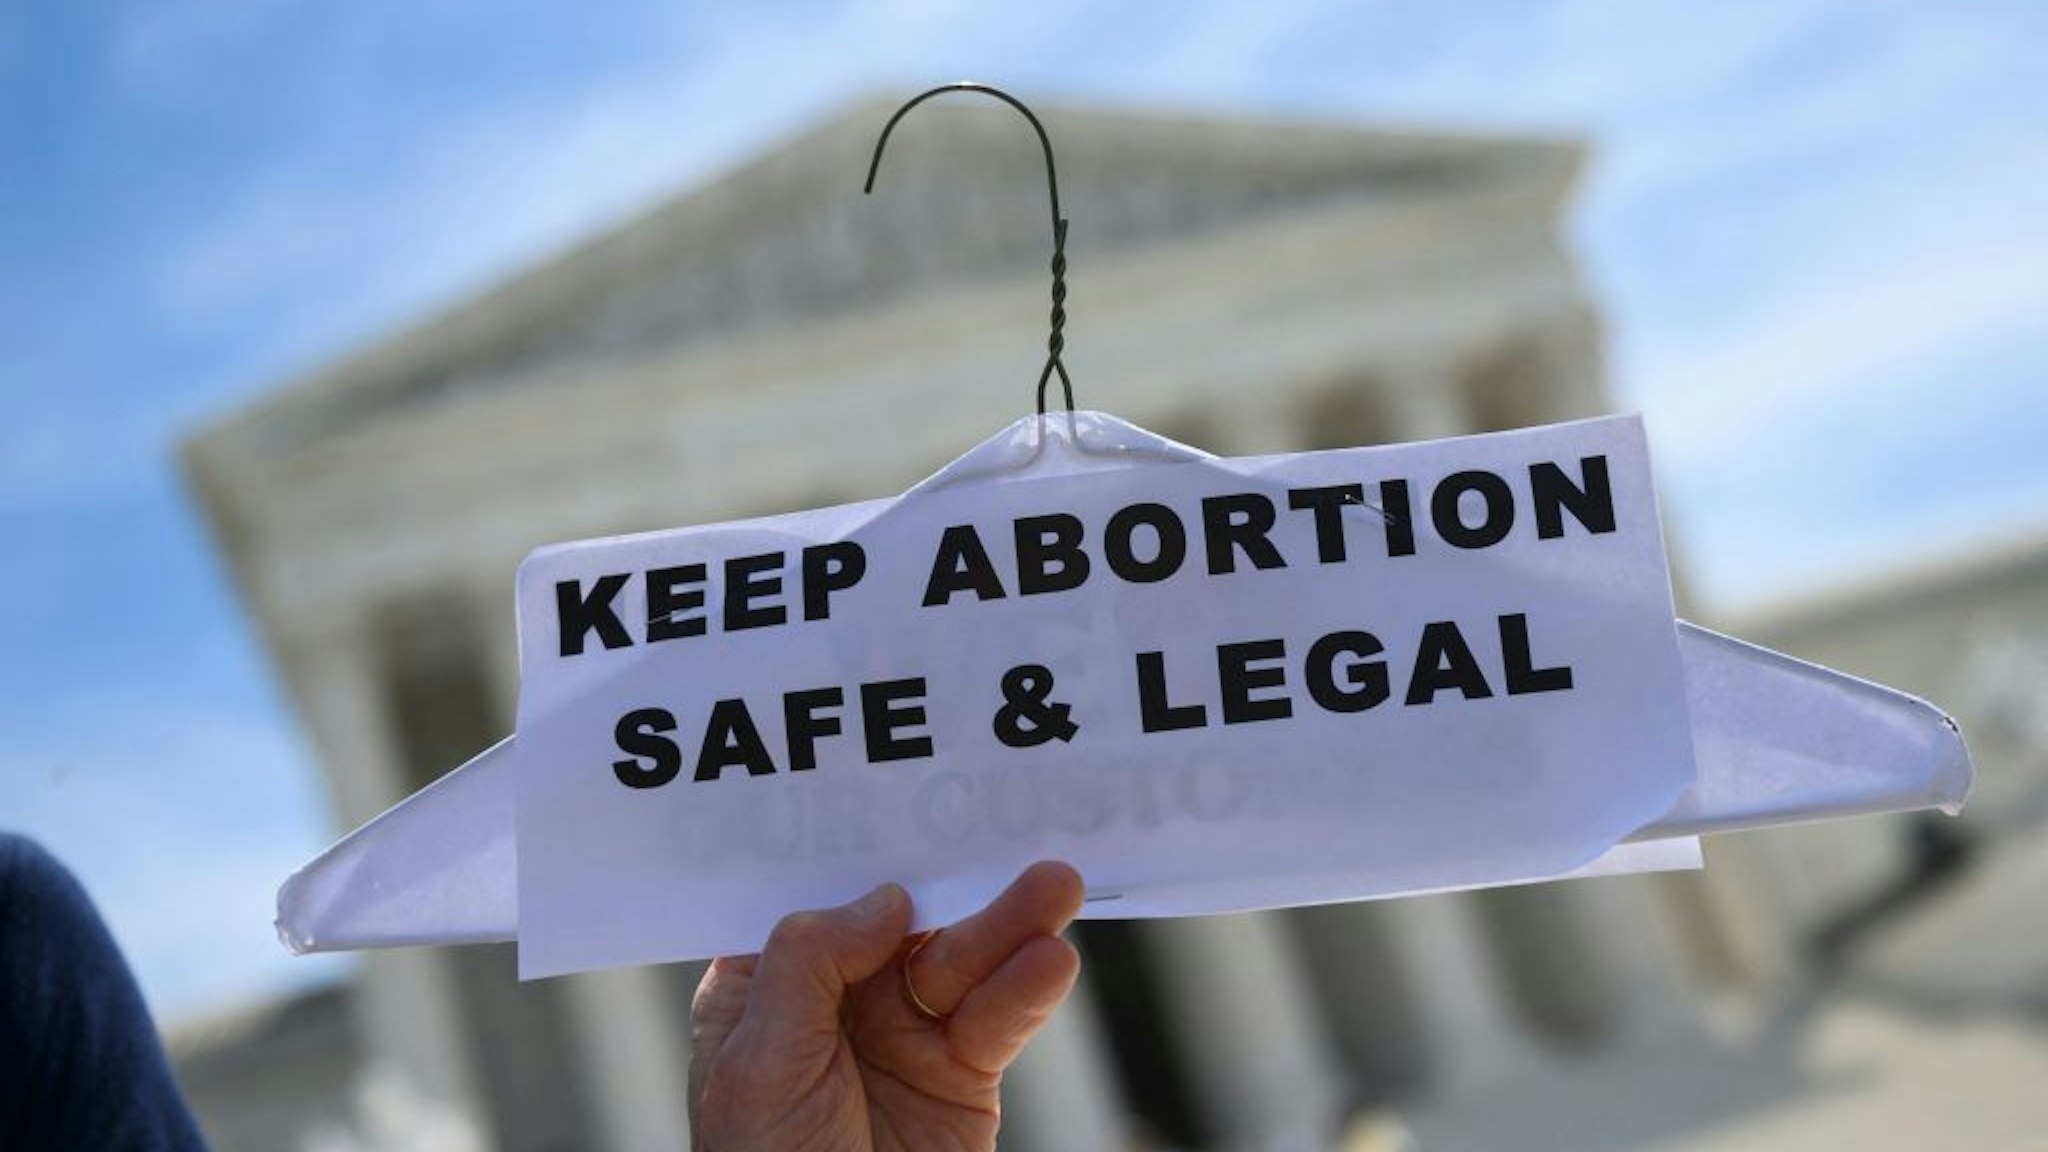 TOPSHOT - Abortion rights activists rally in front of the US Supreme Court in Washington, DC, on May 21, 2019. - Demonstrations were planned across the US on Tuesday in defense of abortion rights, which activists see as increasingly under attack. The "Day of Action" rallies come after the state of Alabama passed the country's most restrictive abortion ban, prohibiting the procedure in all cases, even rape and incest, unless the mother's life is at risk. Alabama is among about 14 states which have adopted laws banning or drastically restricting access to abortion, according to activists. (Photo by Andrew CABALLERO-REYNOLDS / AFP) (Photo by ANDREW CABALLERO-REYNOLDS/AFP via Getty Images)